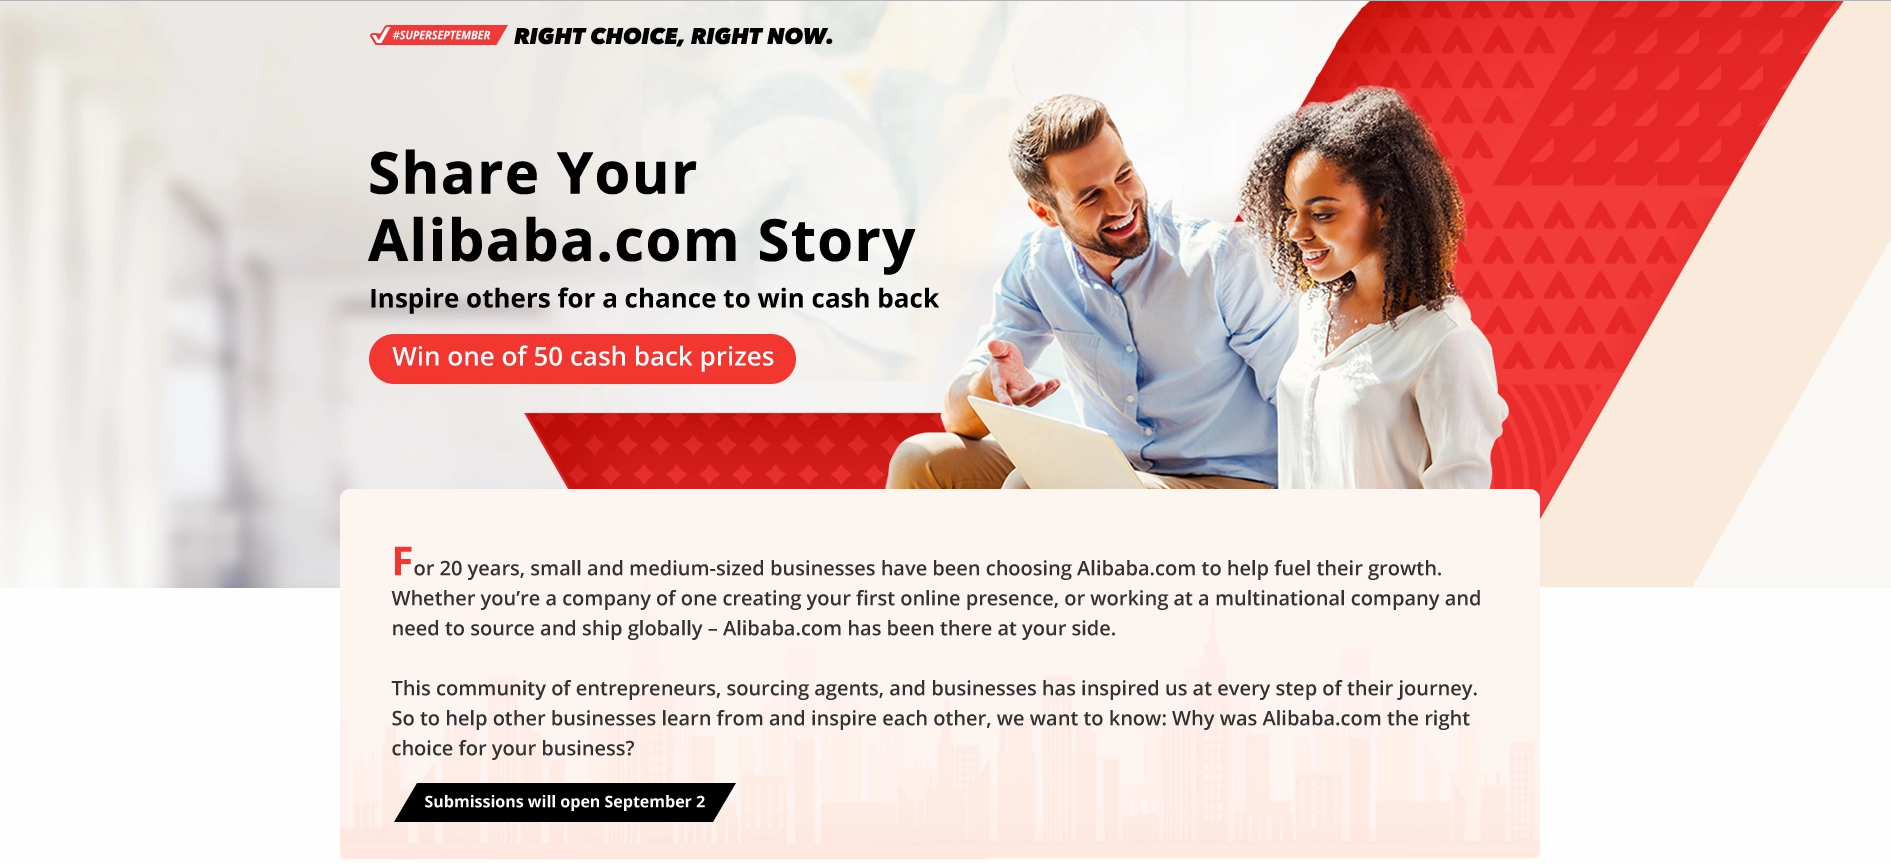 Share Your alibaba Story